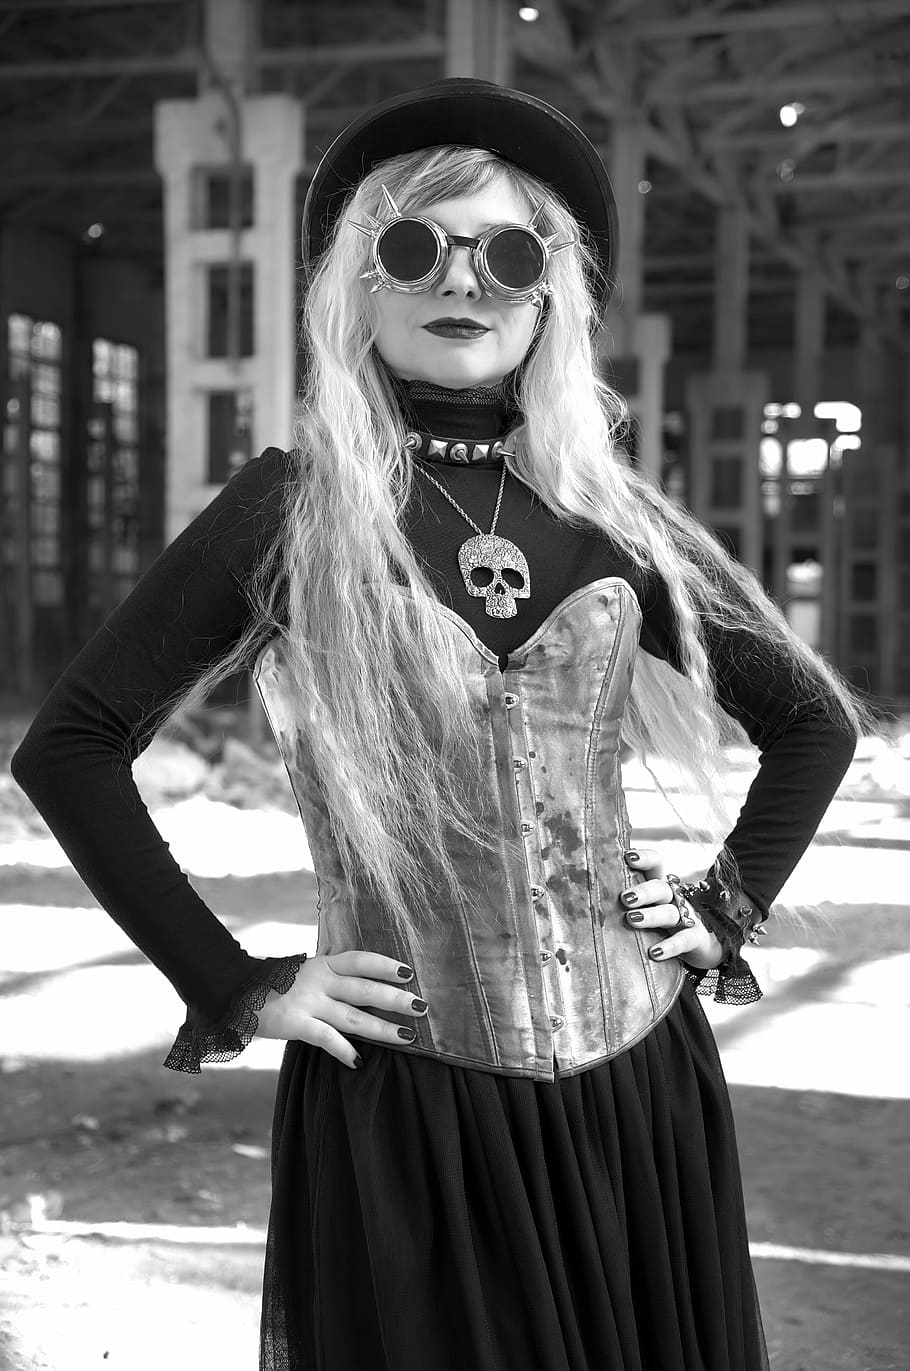 grayscale photo, woman, taking, holding, waist, people, portrait, one, costume, grown up